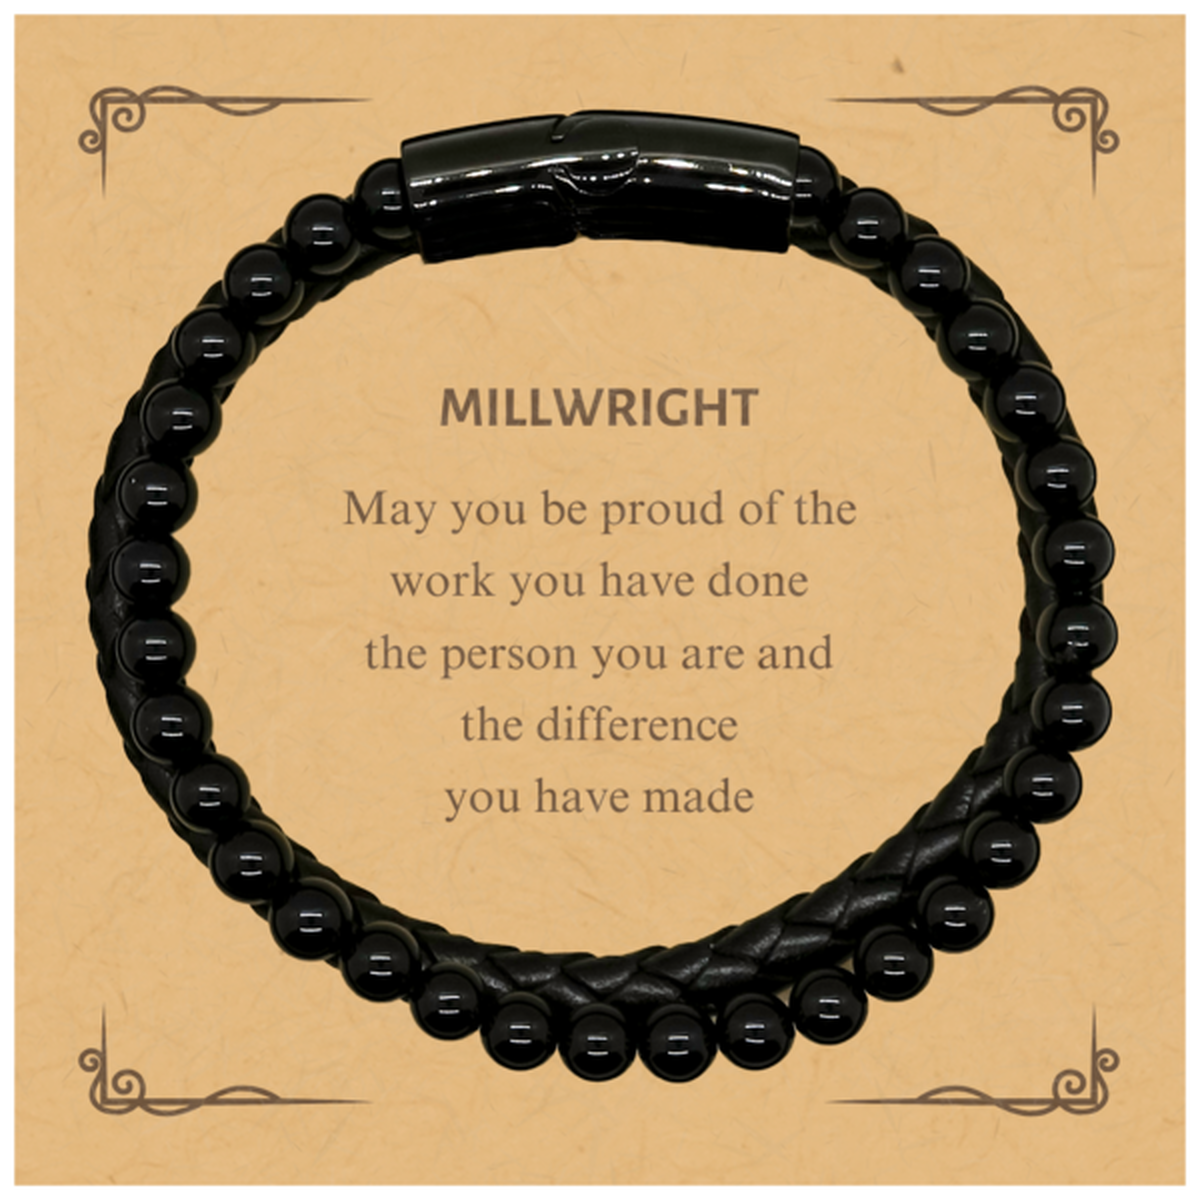 Millwright May you be proud of the work you have done, Retirement Millwright Stone Leather Bracelets for Colleague Appreciation Gifts Amazing for Millwright